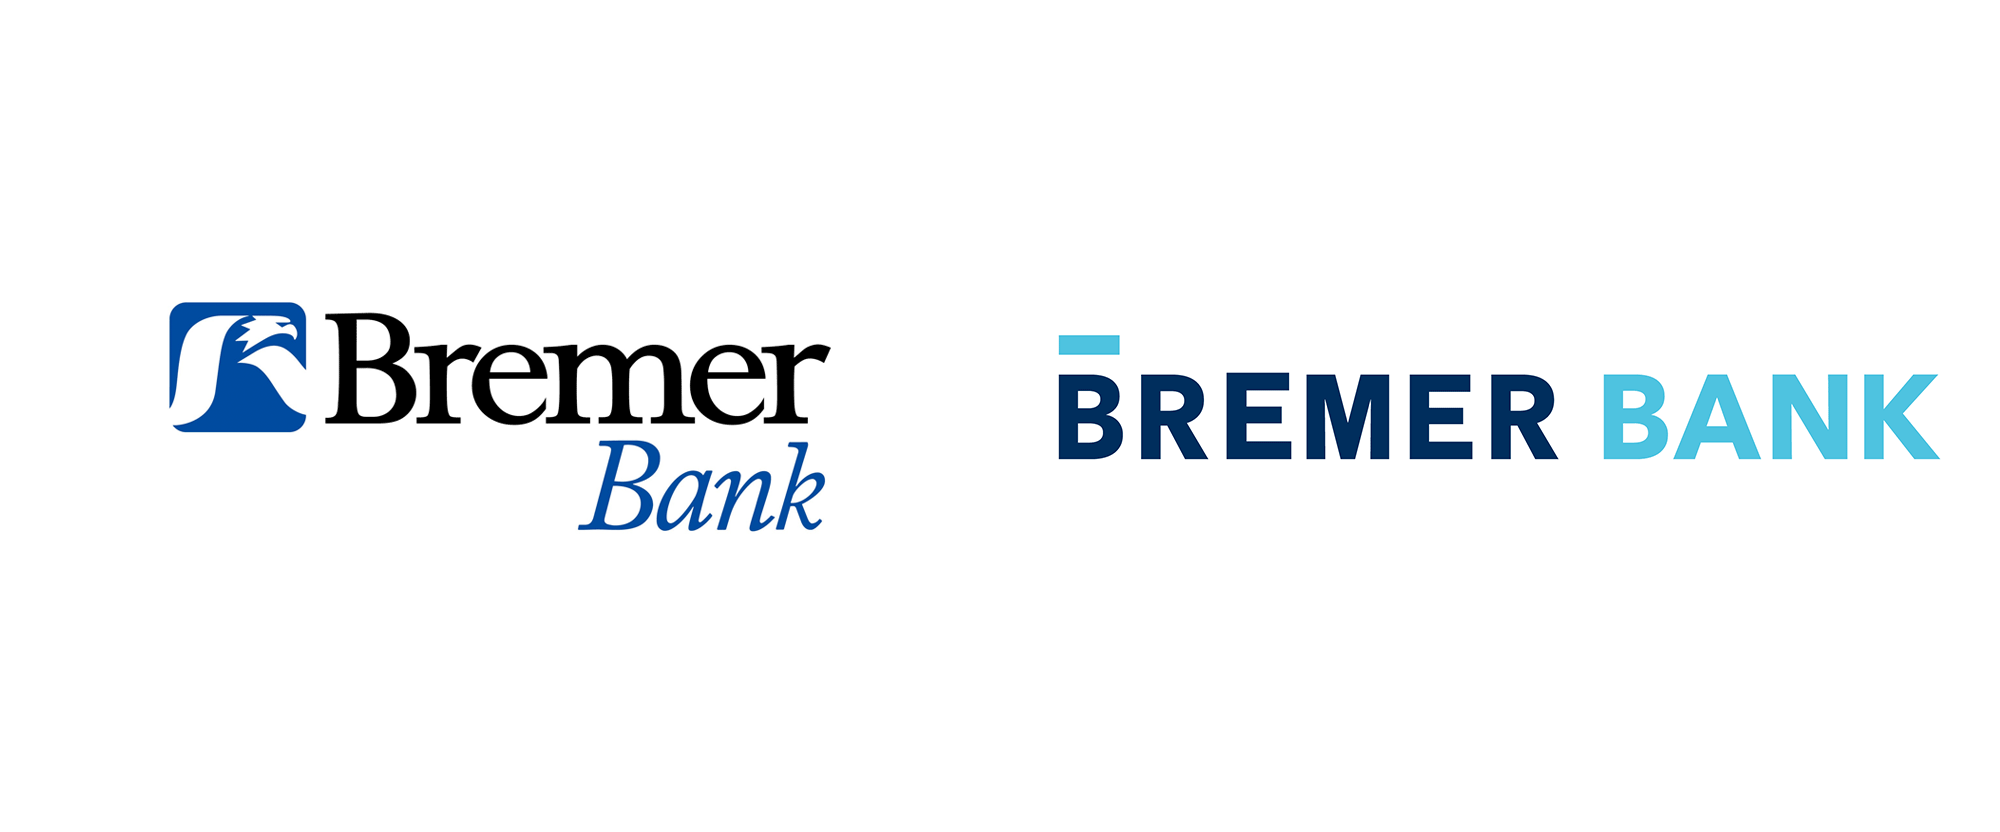 Www.bank Logo - Brand New: New Logo and Identity for Bremer Bank